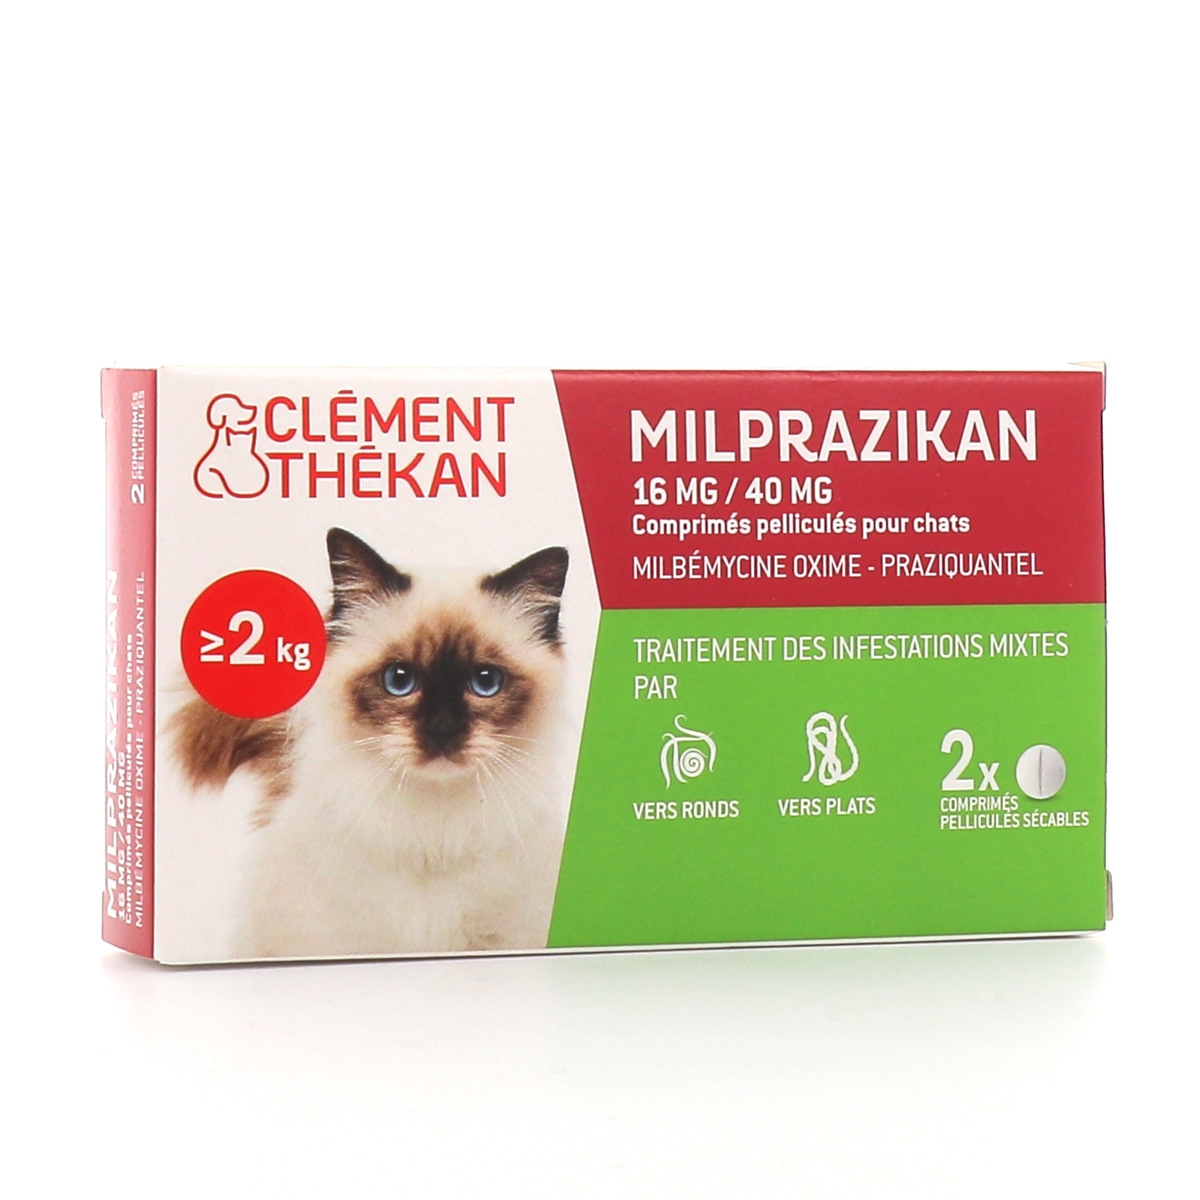 Vermifuge pour chat - Comment vermifuger son chat ? - Doctissimo